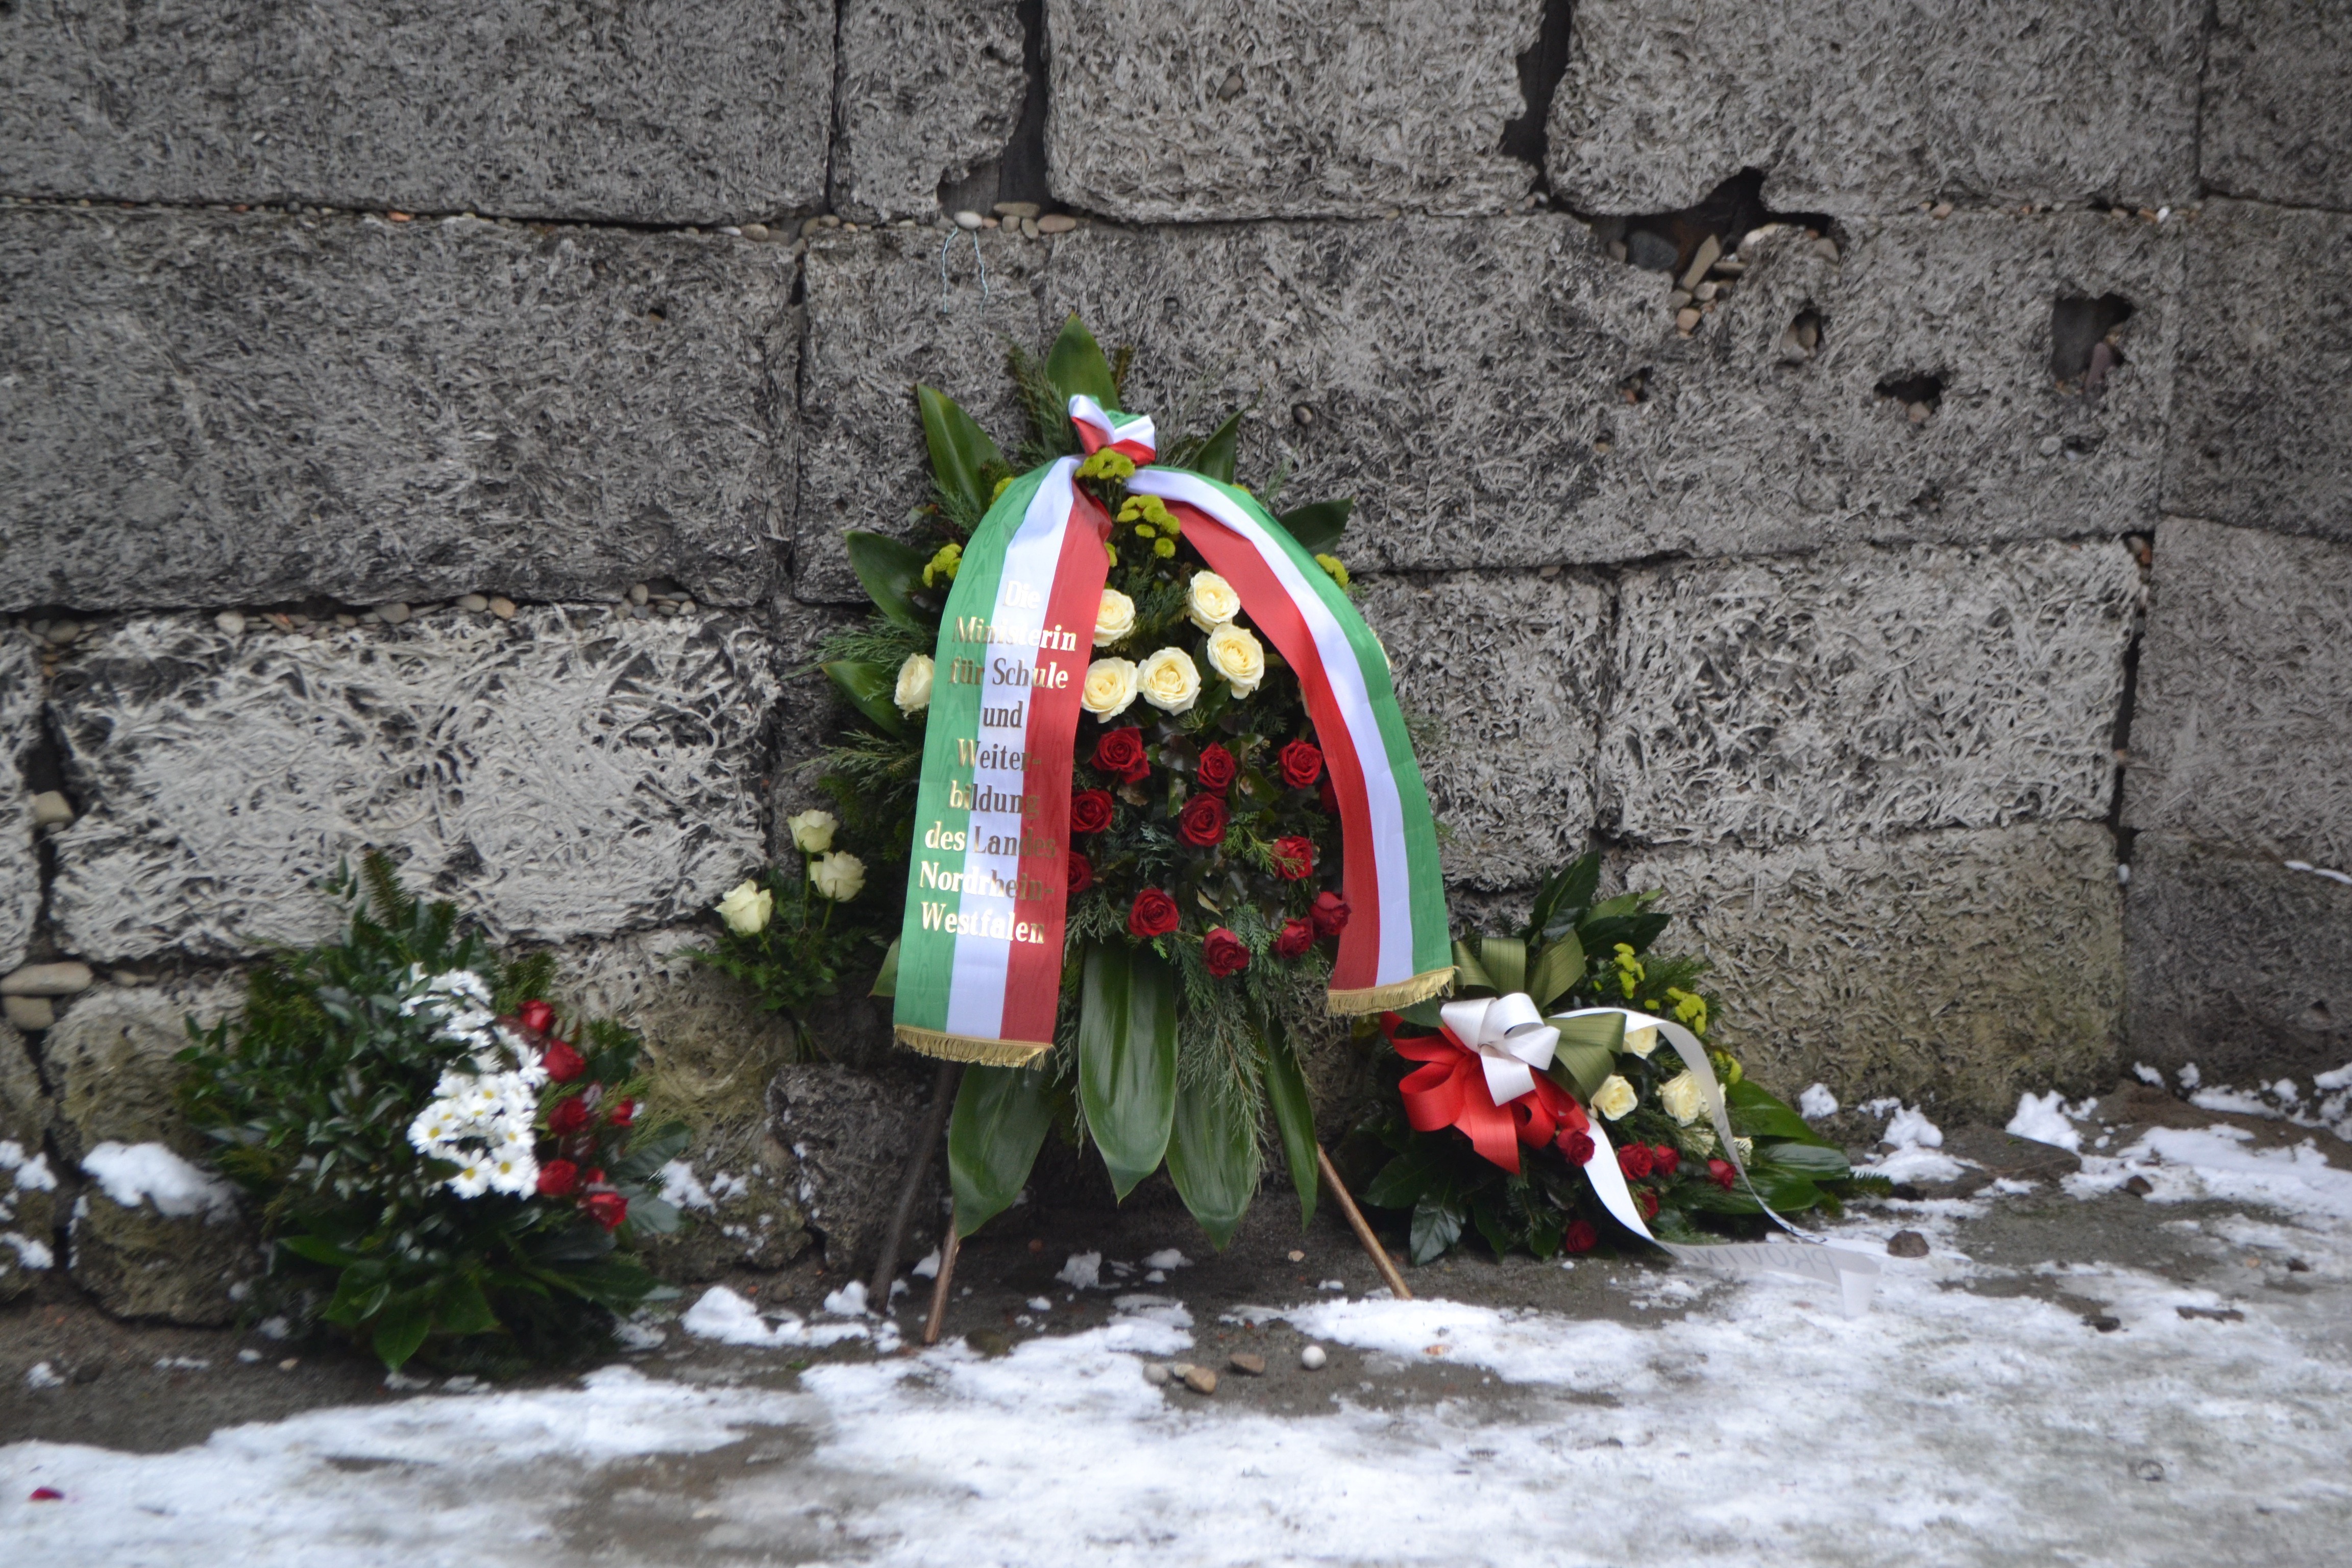 A photo of the &quot;death wall,&quot; in Auschwitz, surrounded by flowers left by delegations from around the world for the 70th anniversary liberation commemoration.